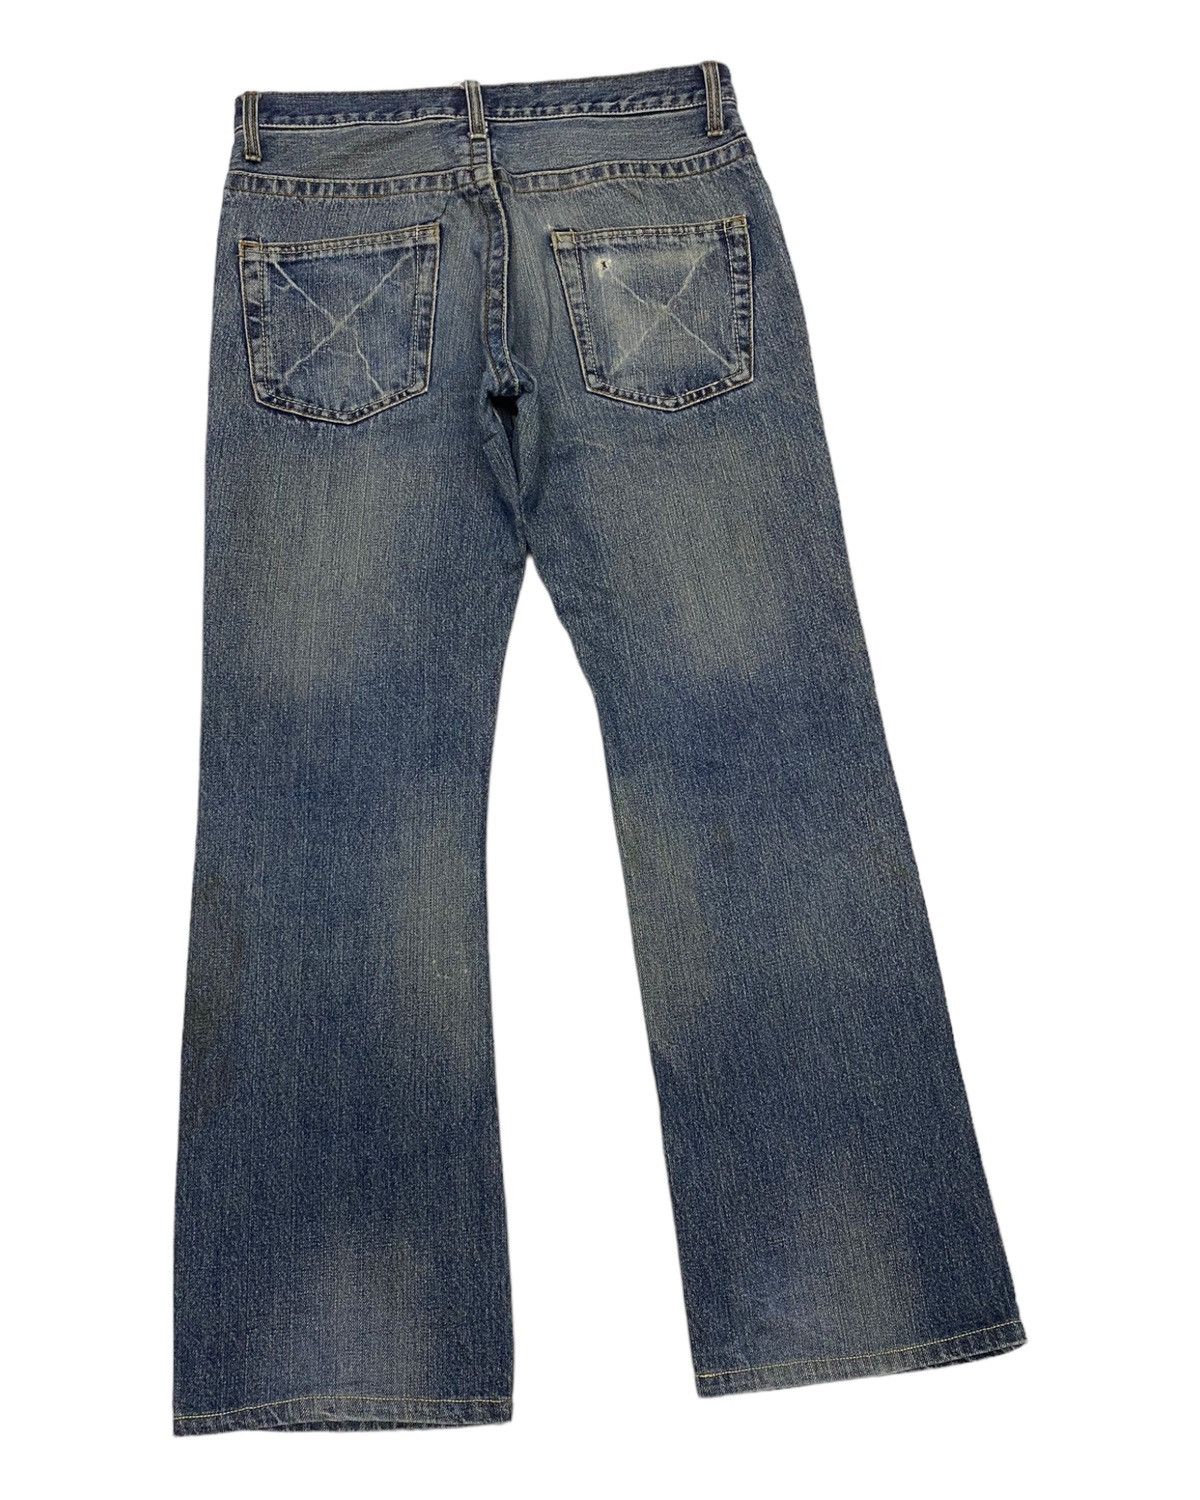 Archival Clothing - FLARED🔥ROOT THREE DISTRESSED DENIM JEANS - 4